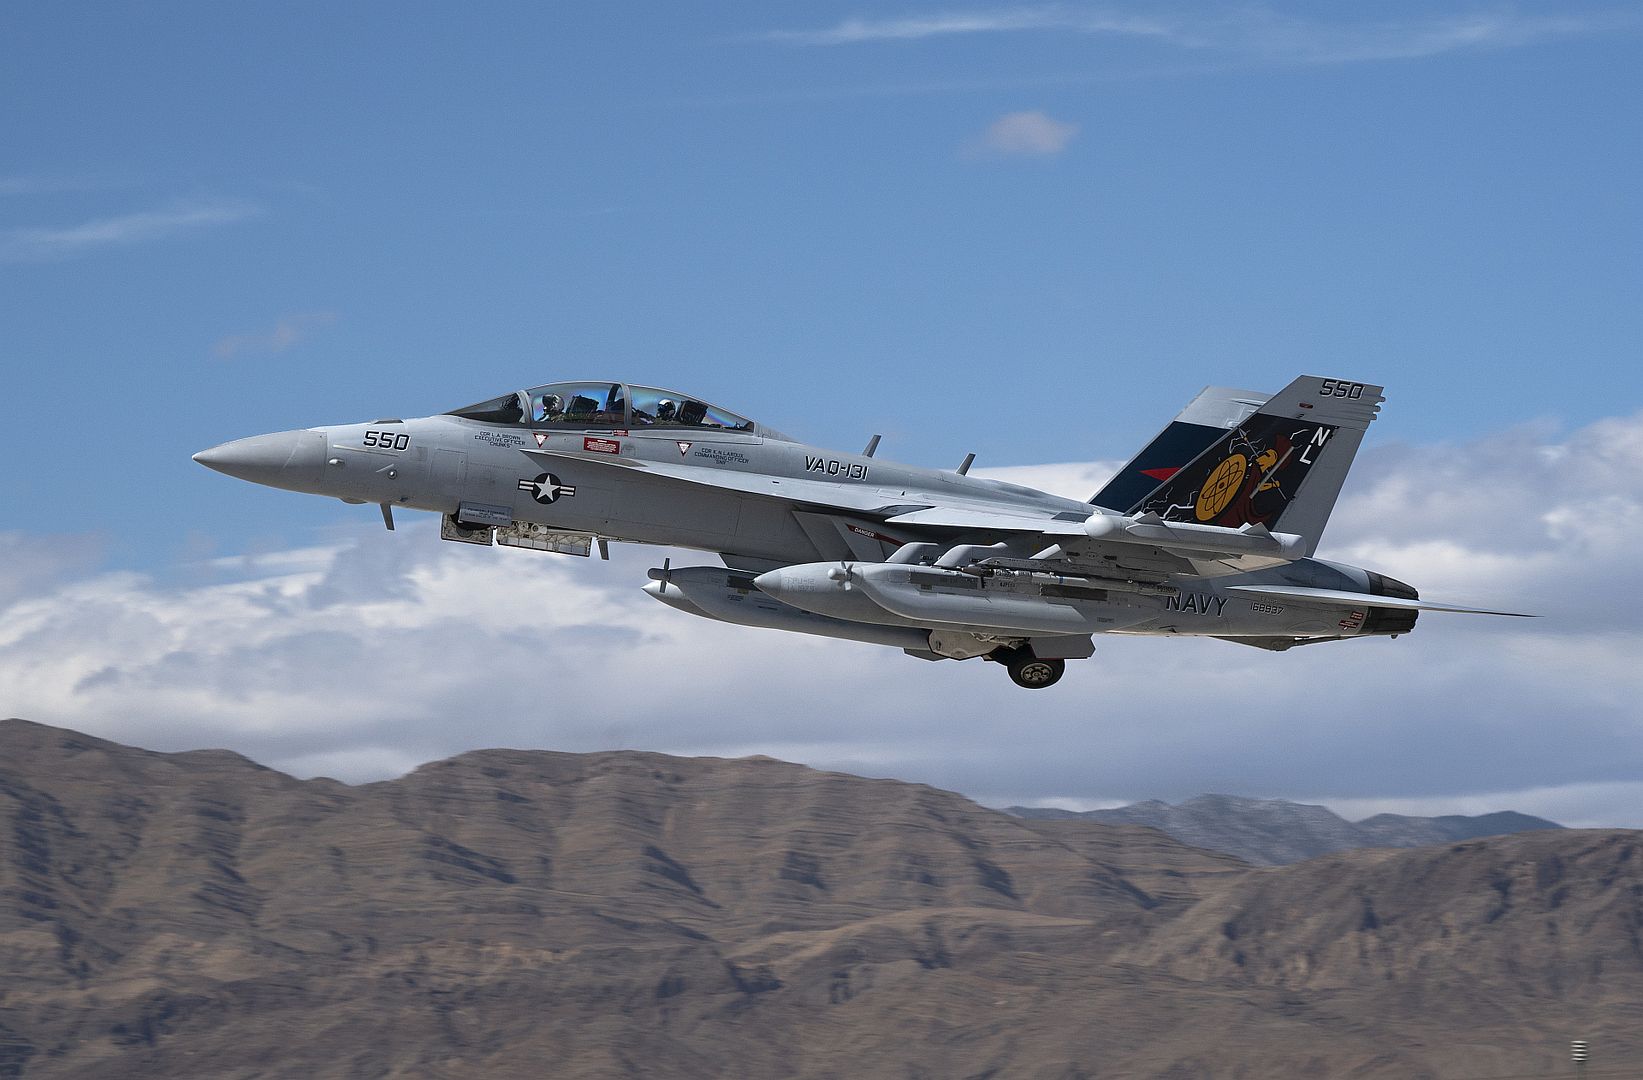 18G Growler Assigned To Electronic Attack Squadron 131 Naval Air Station Whidbey Island Washington Arrives At Nellis Air Force Base Nevada March 9 2022